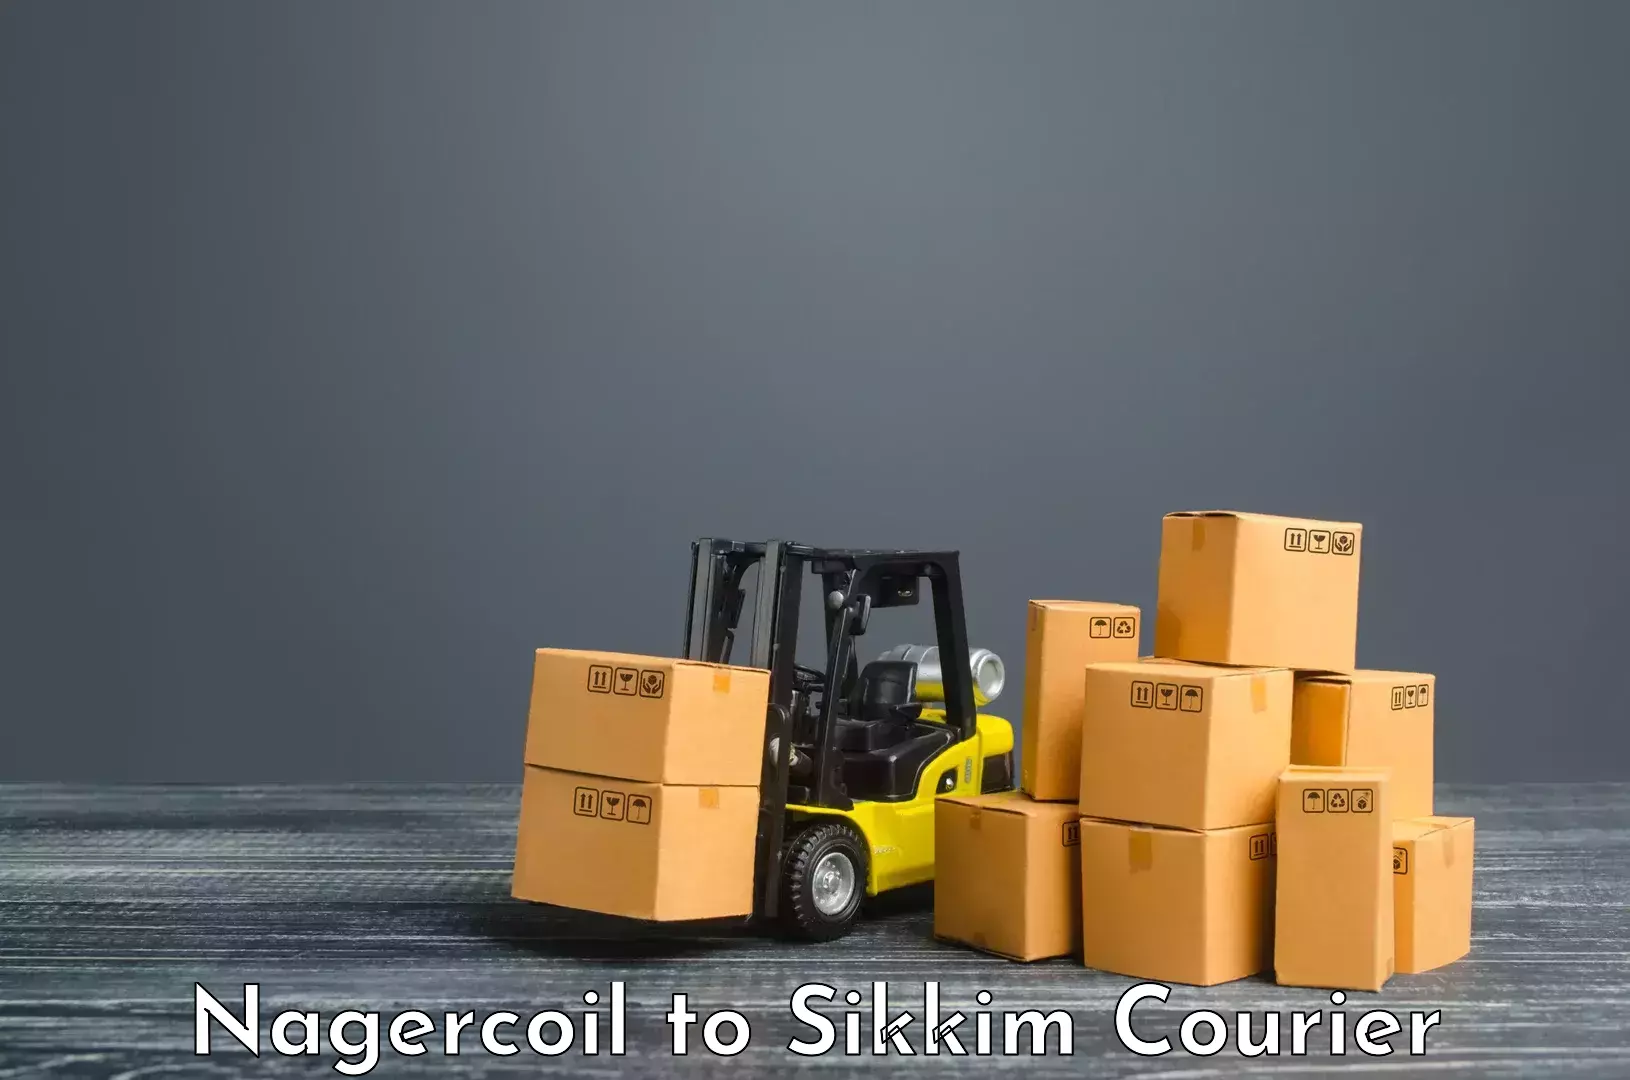 Logistics service provider Nagercoil to Pelling